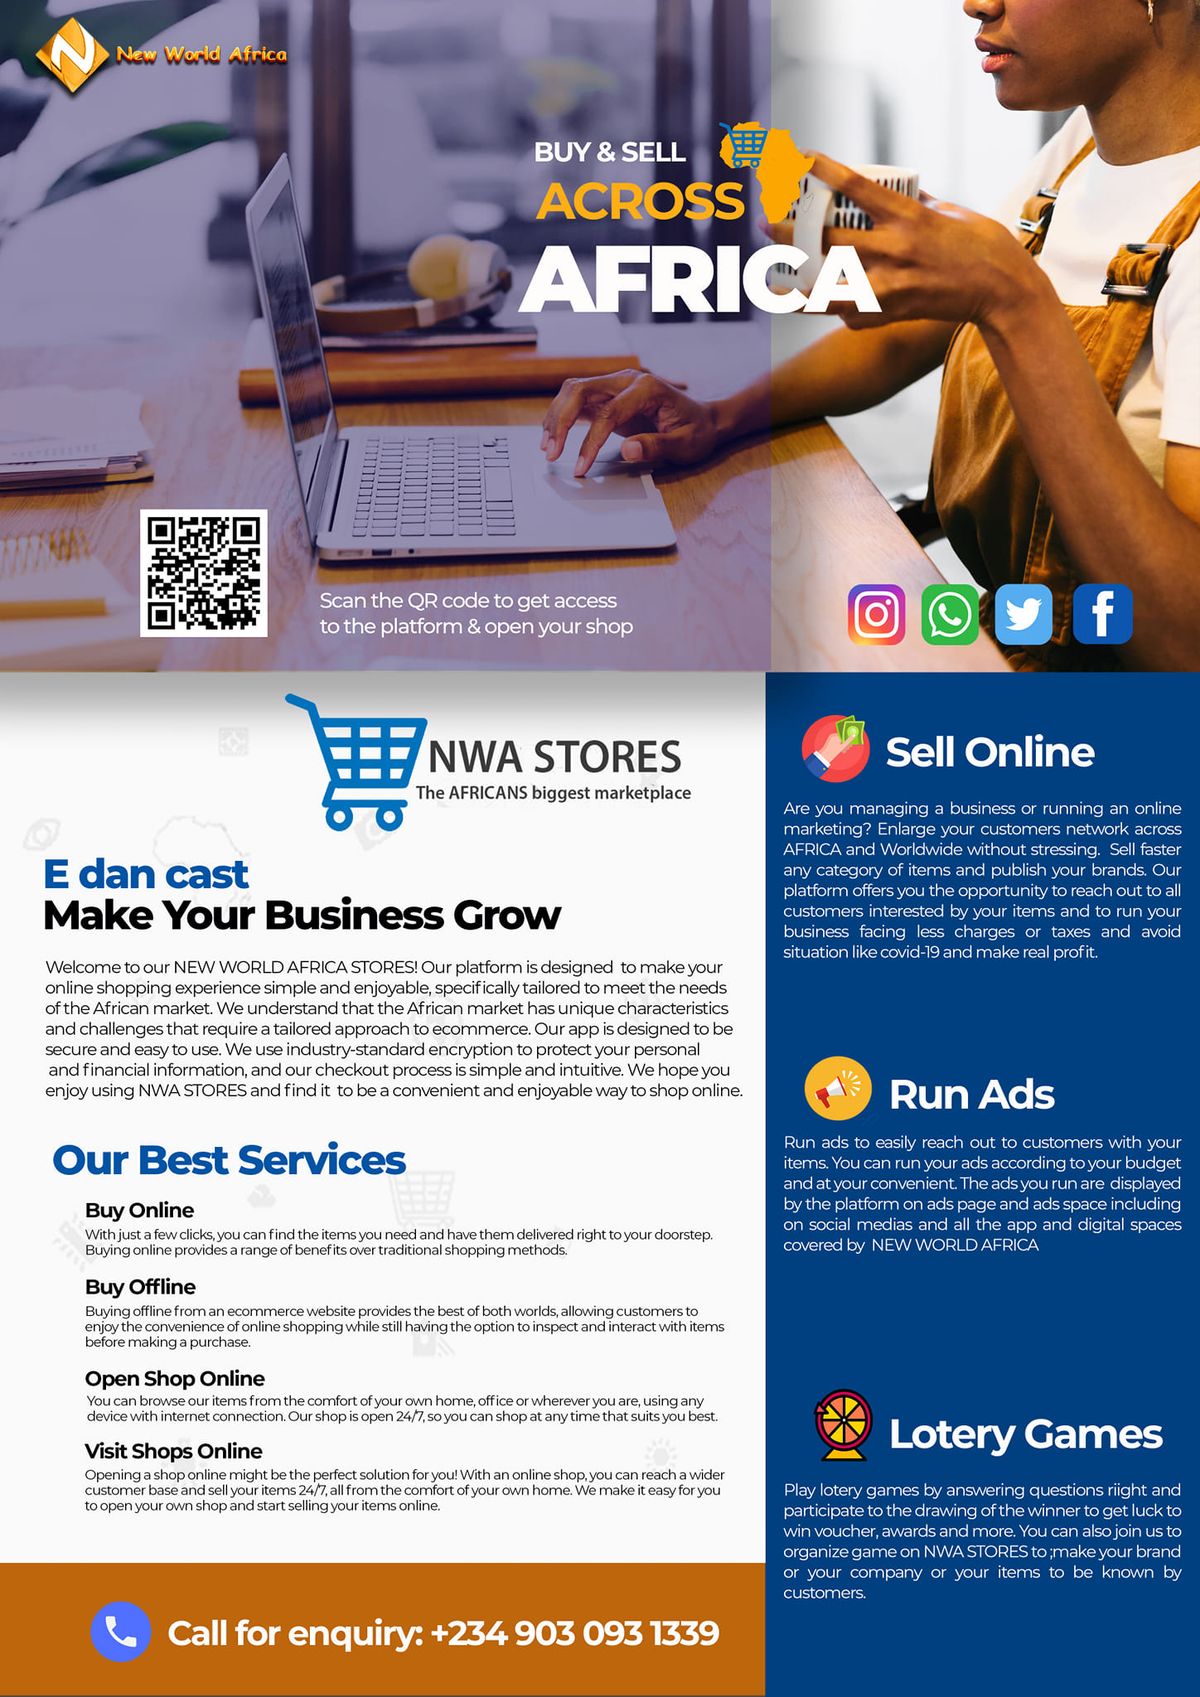 BUY & SELL ACROSS AFRICA WITH NWA STORES 